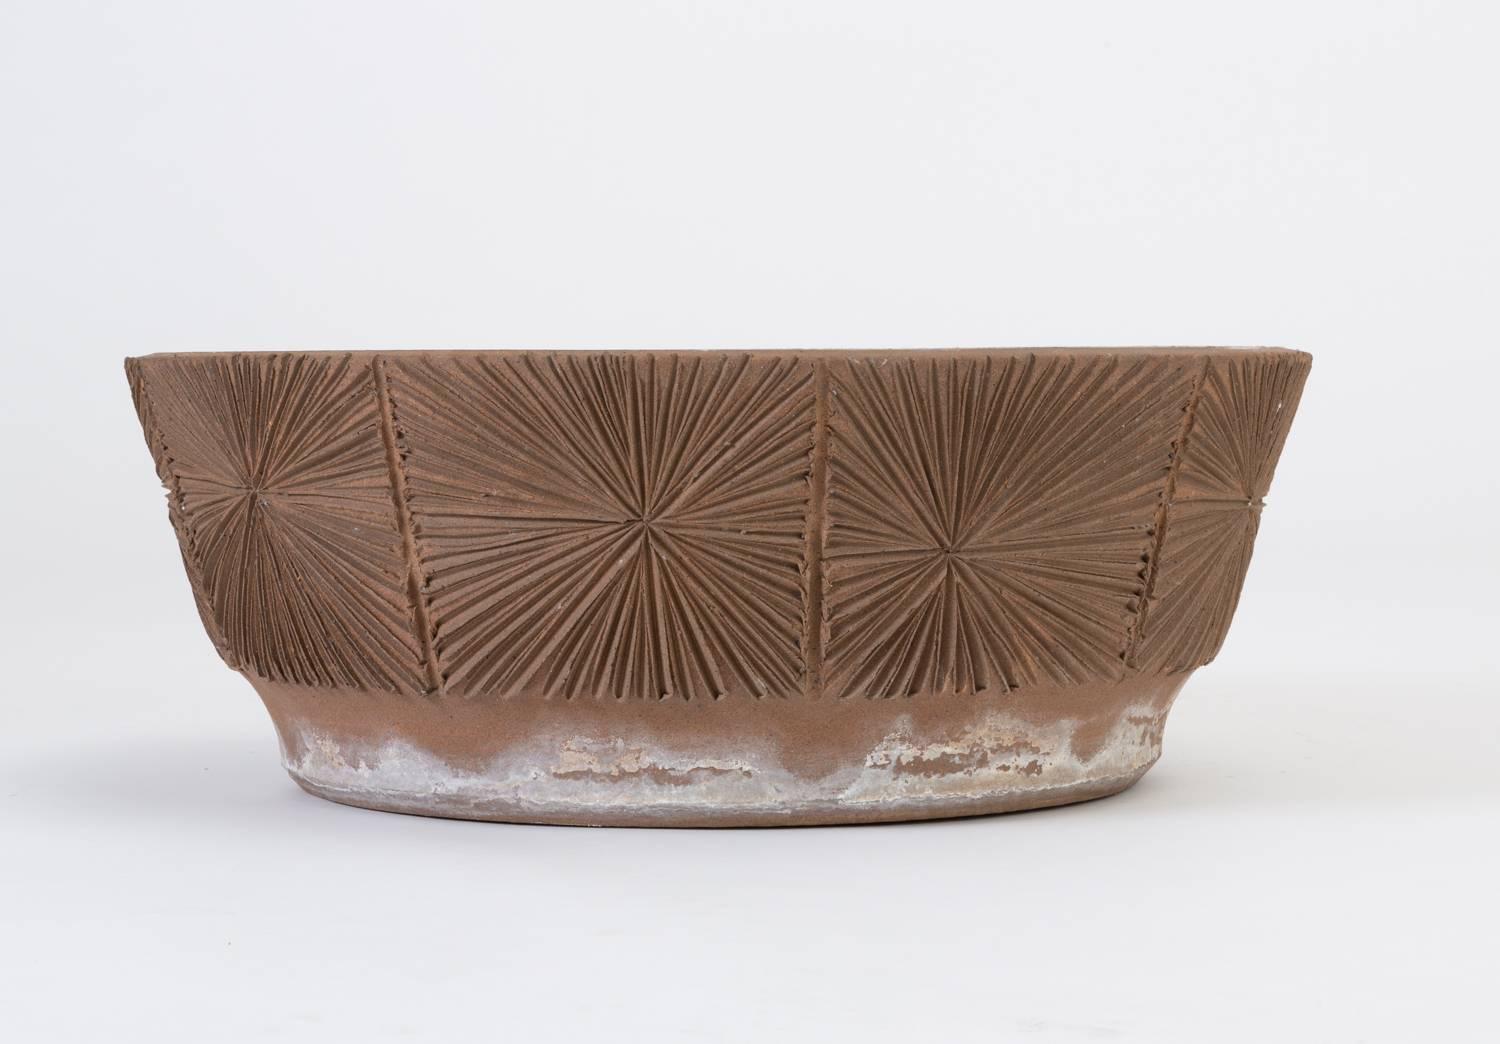 A stoneware saucer planter from David Cressey/Robert Maxwell 1970s collaboration Earthgender. The planter has flat, angled sides and an incised all-over sunburst pattern. Unglazed. 

Condition: Excellent original condition; hard water buildup on